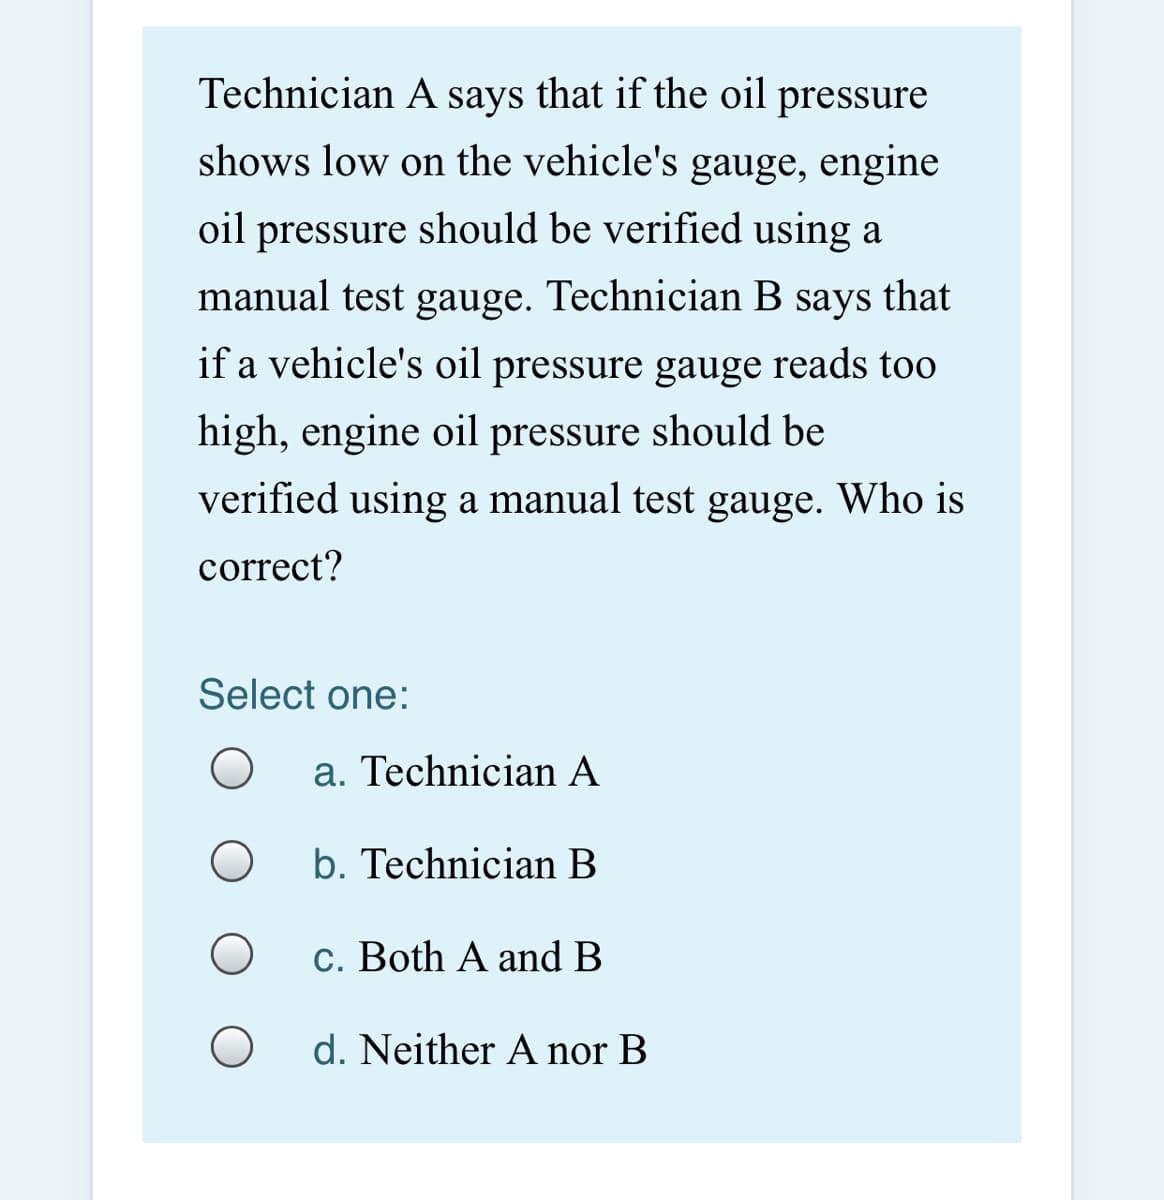 Technician A says that if the oil pressure
shows low on the vehicle's gauge, engine
oil pressure should be verified using a
manual test gauge. Technician B says that
if a vehicle's oil pressure gauge reads too
high, engine oil pressure should be
verified using a manual test gauge. Who is
correct?
Select one:
a. Technician A
b. Technician B
c. Both A and B
d. Neither A nor B
